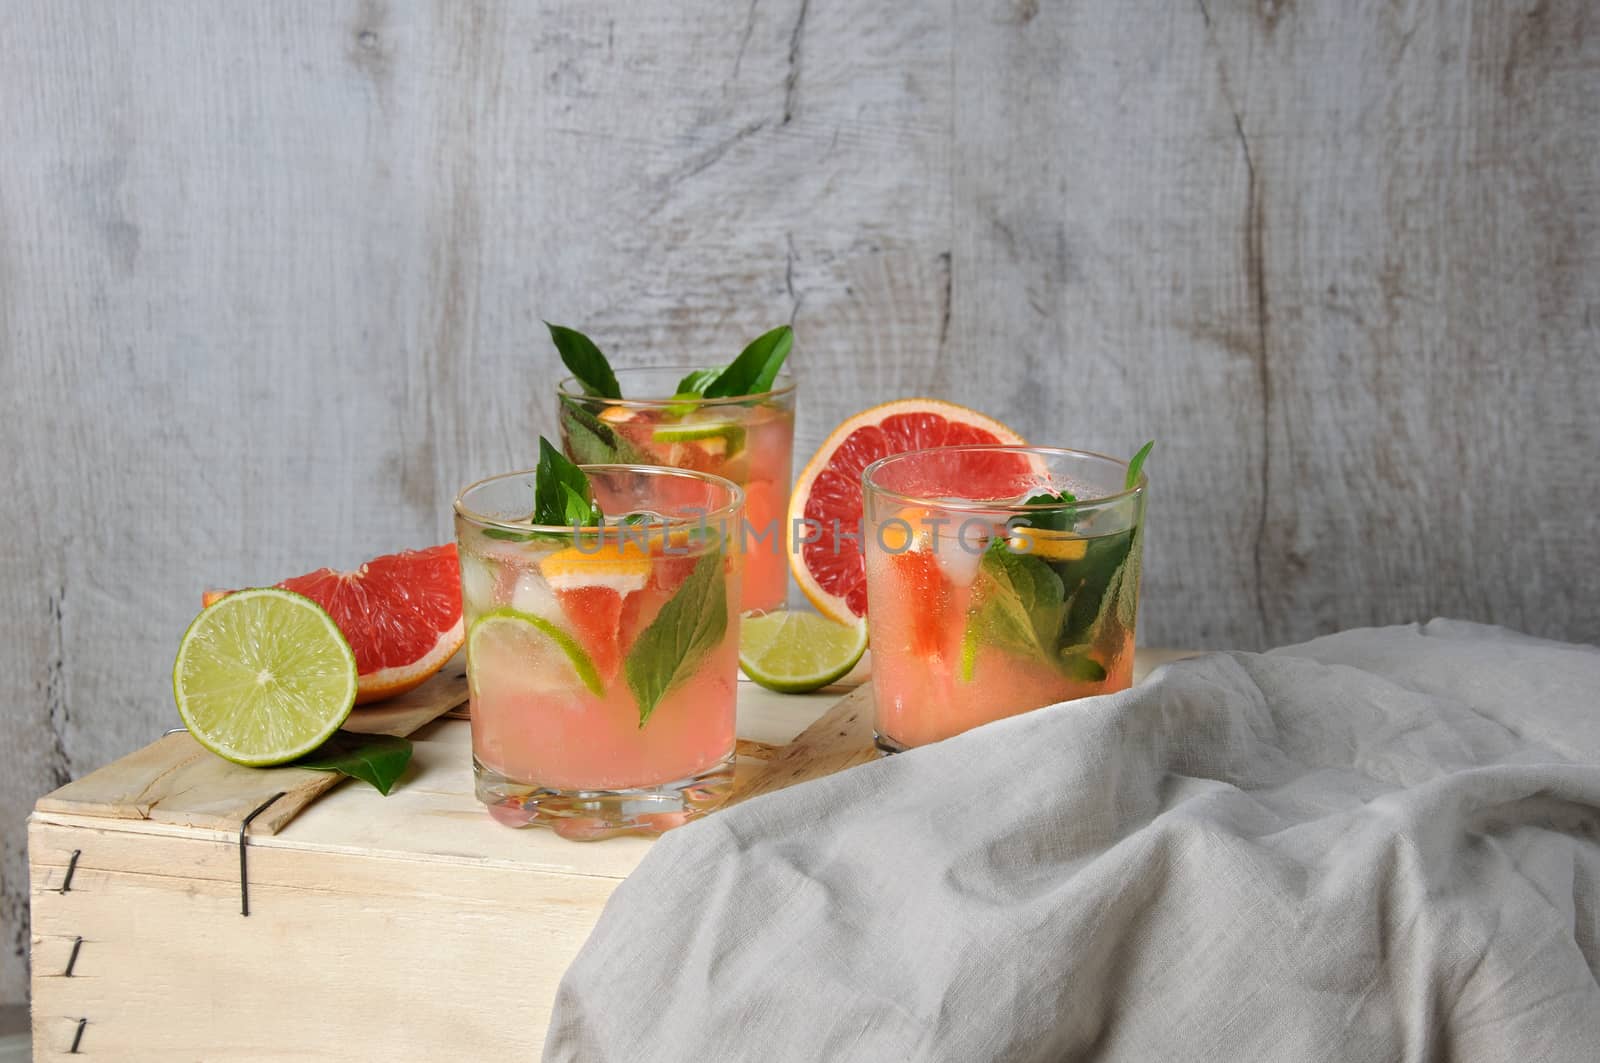 Cocktail of grapefruit and lemon basil by Apolonia